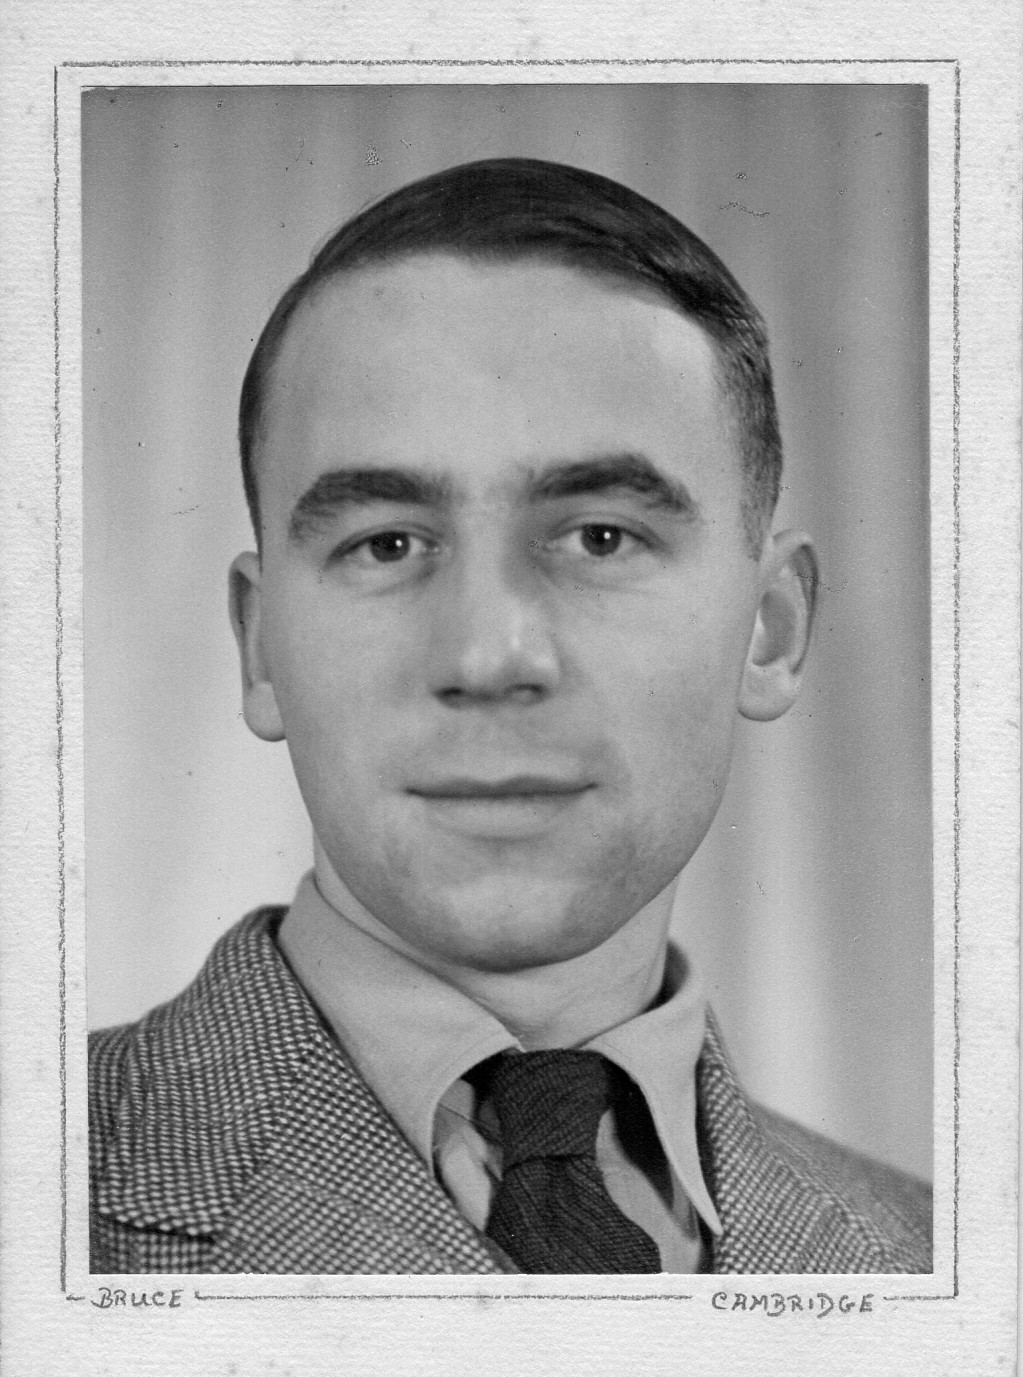 Peter Tranchell in the 1940s